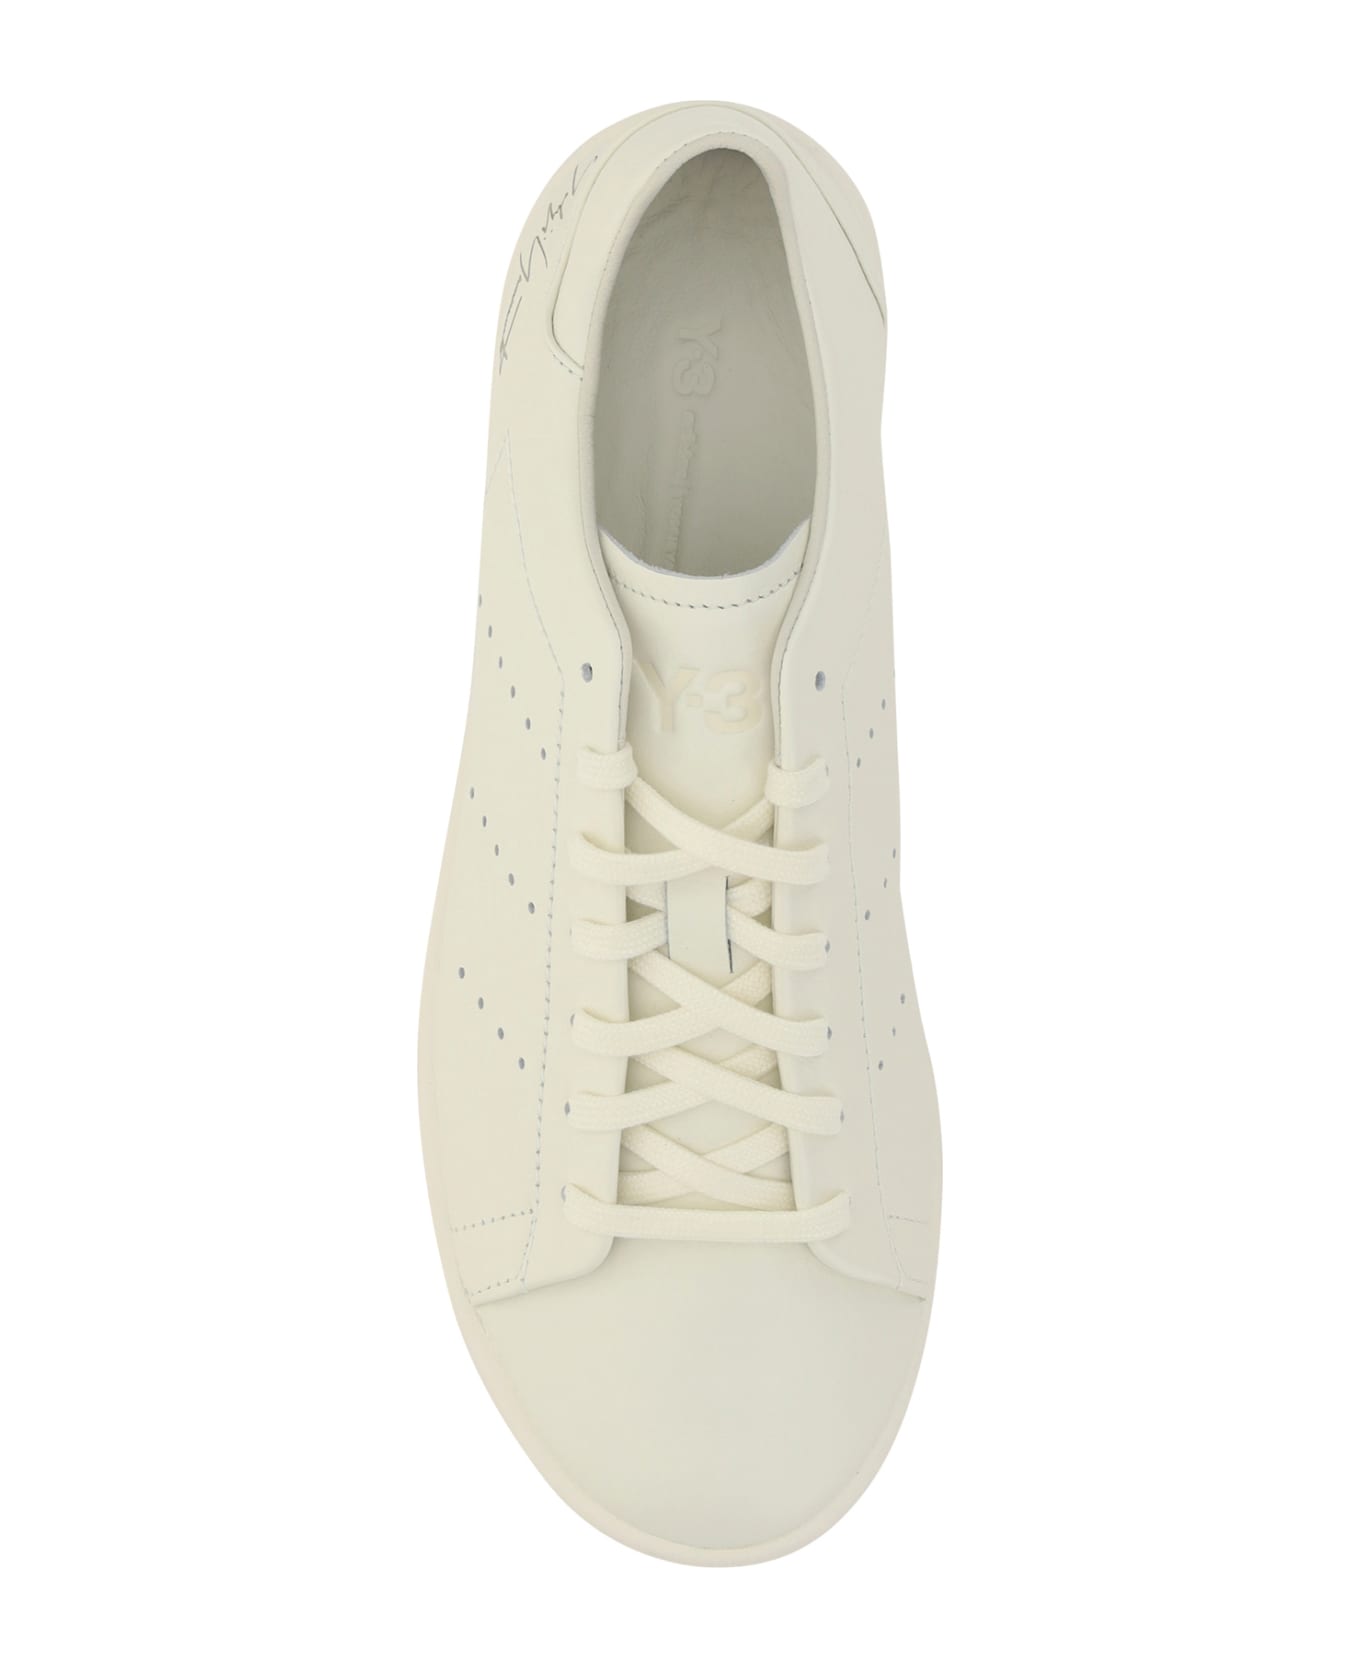 Y-3 Stan Smith Sneakers - Owhite